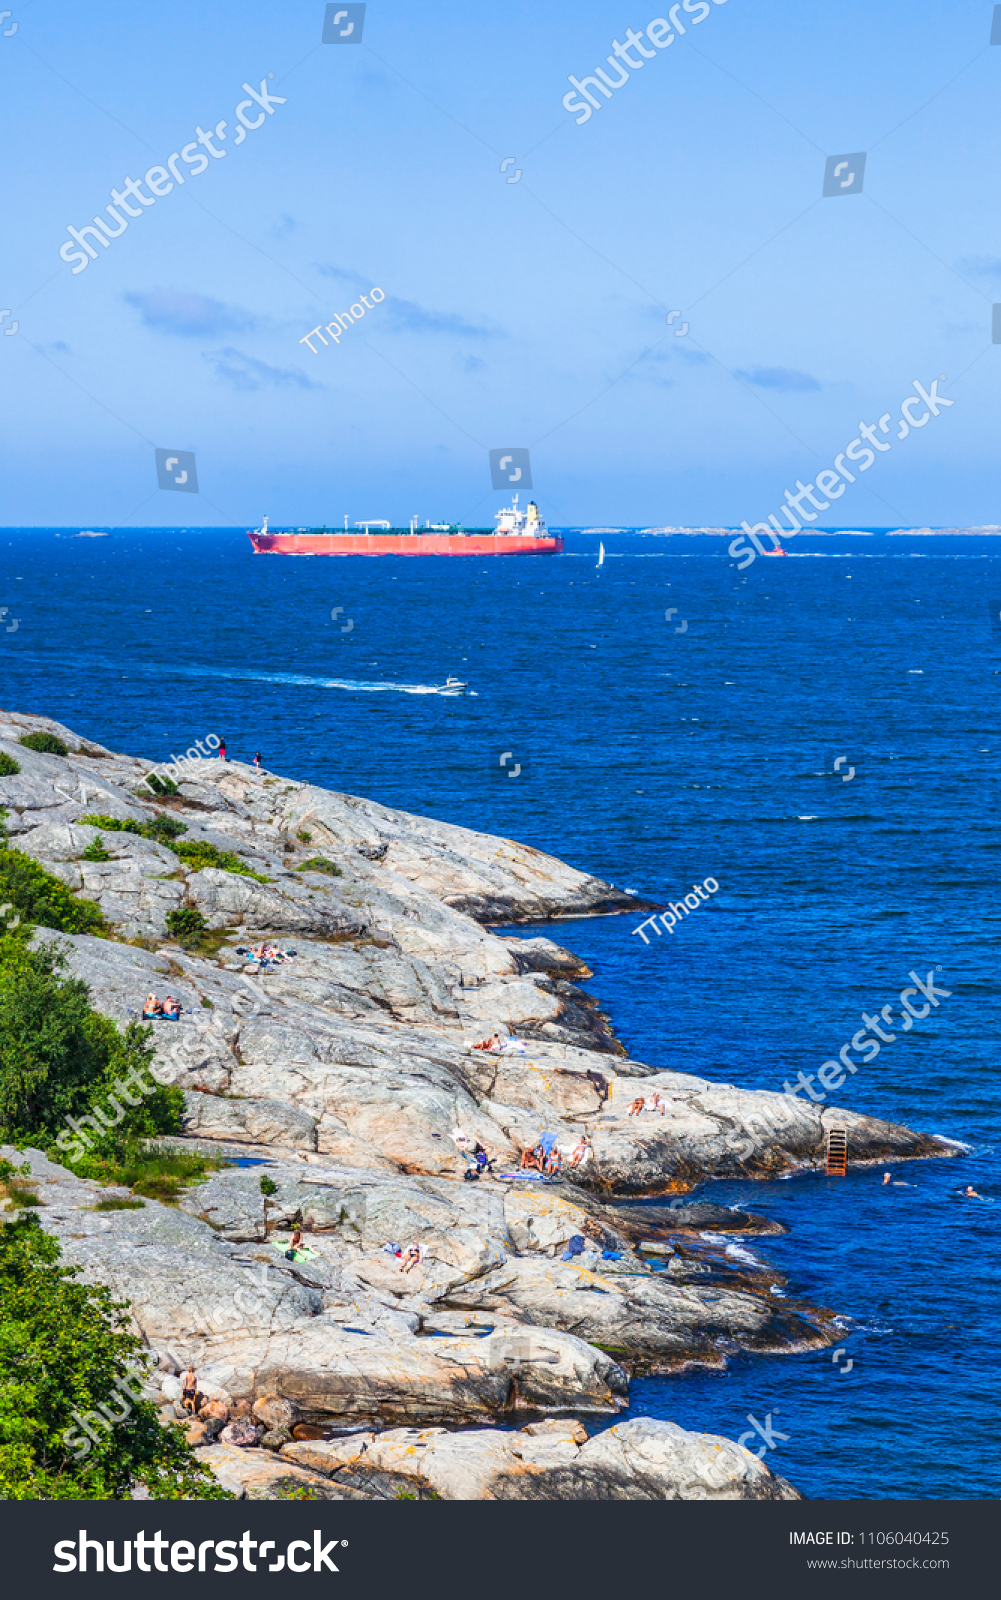 Rocky coast with sunbathing people and a cargo ship on the sea #1106040425